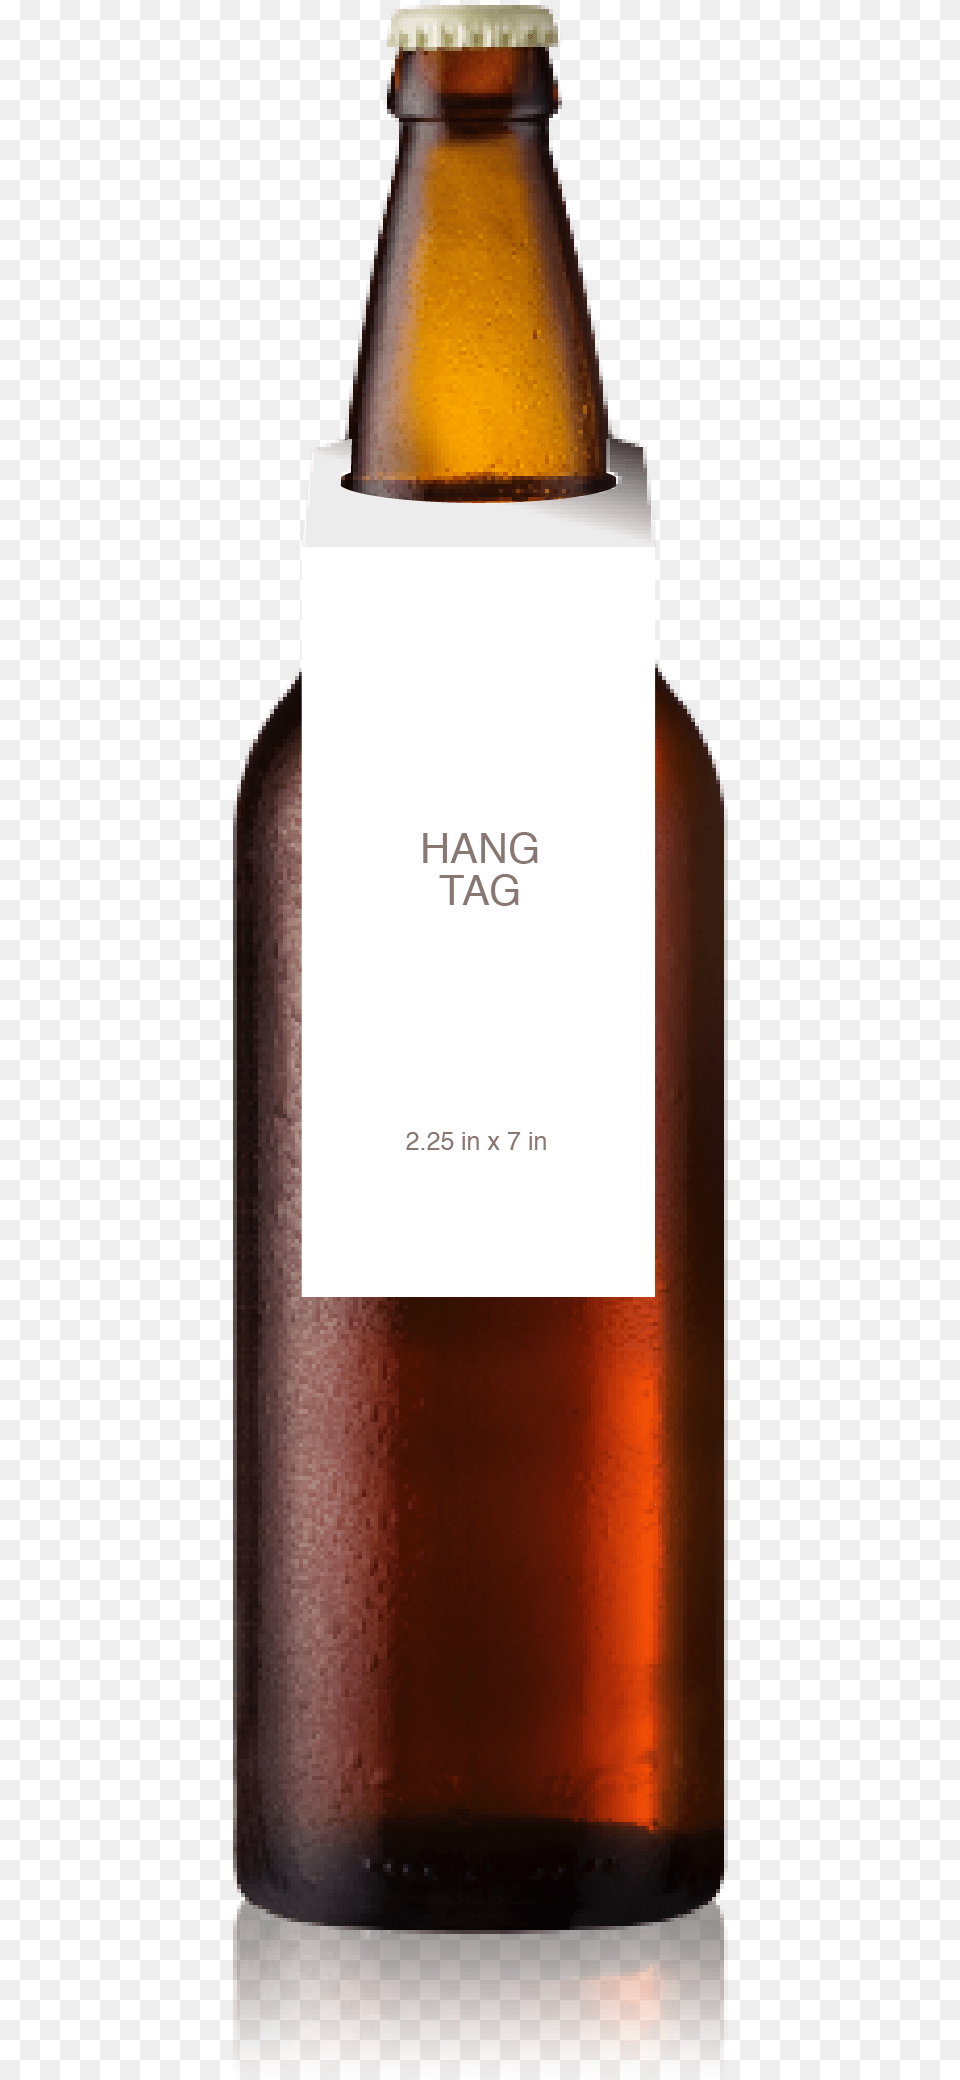 Bomber Bottle With A Blank Hangtag From Crushtag Old Worthy Who Drank My Porridge Stout Beer, Alcohol, Beer Bottle, Beverage, Liquor Png